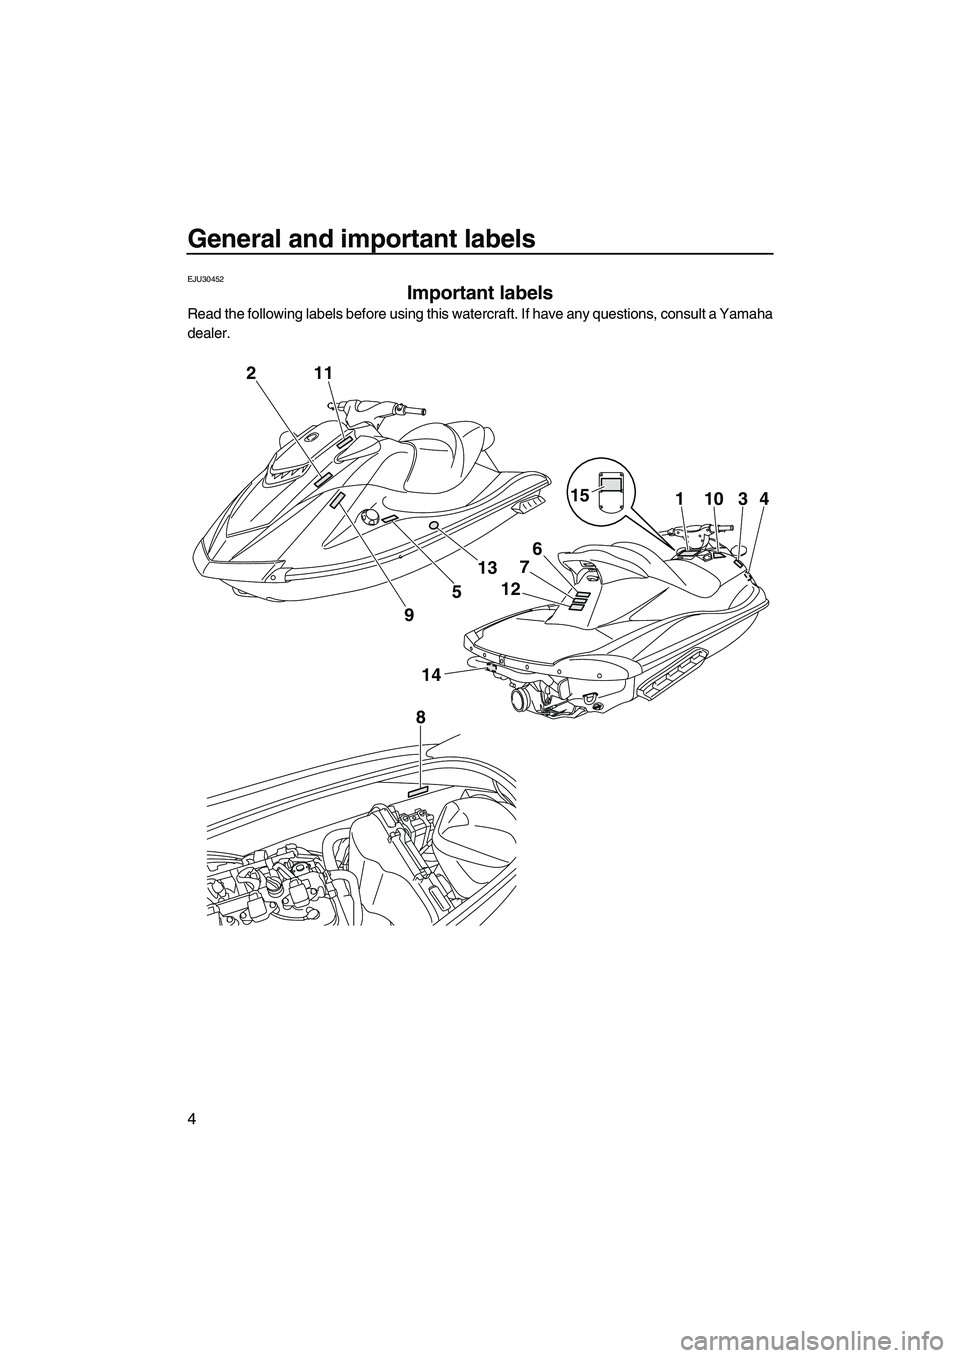 YAMAHA VXS 2012  Owners Manual General and important labels
4
EJU30452
Important labels 
Read the following labels before using this watercraft. If have any questions, consult a Yamaha
dealer.
2
14
8
15
6
7
12
11034
11
9
5
13
UF2M7